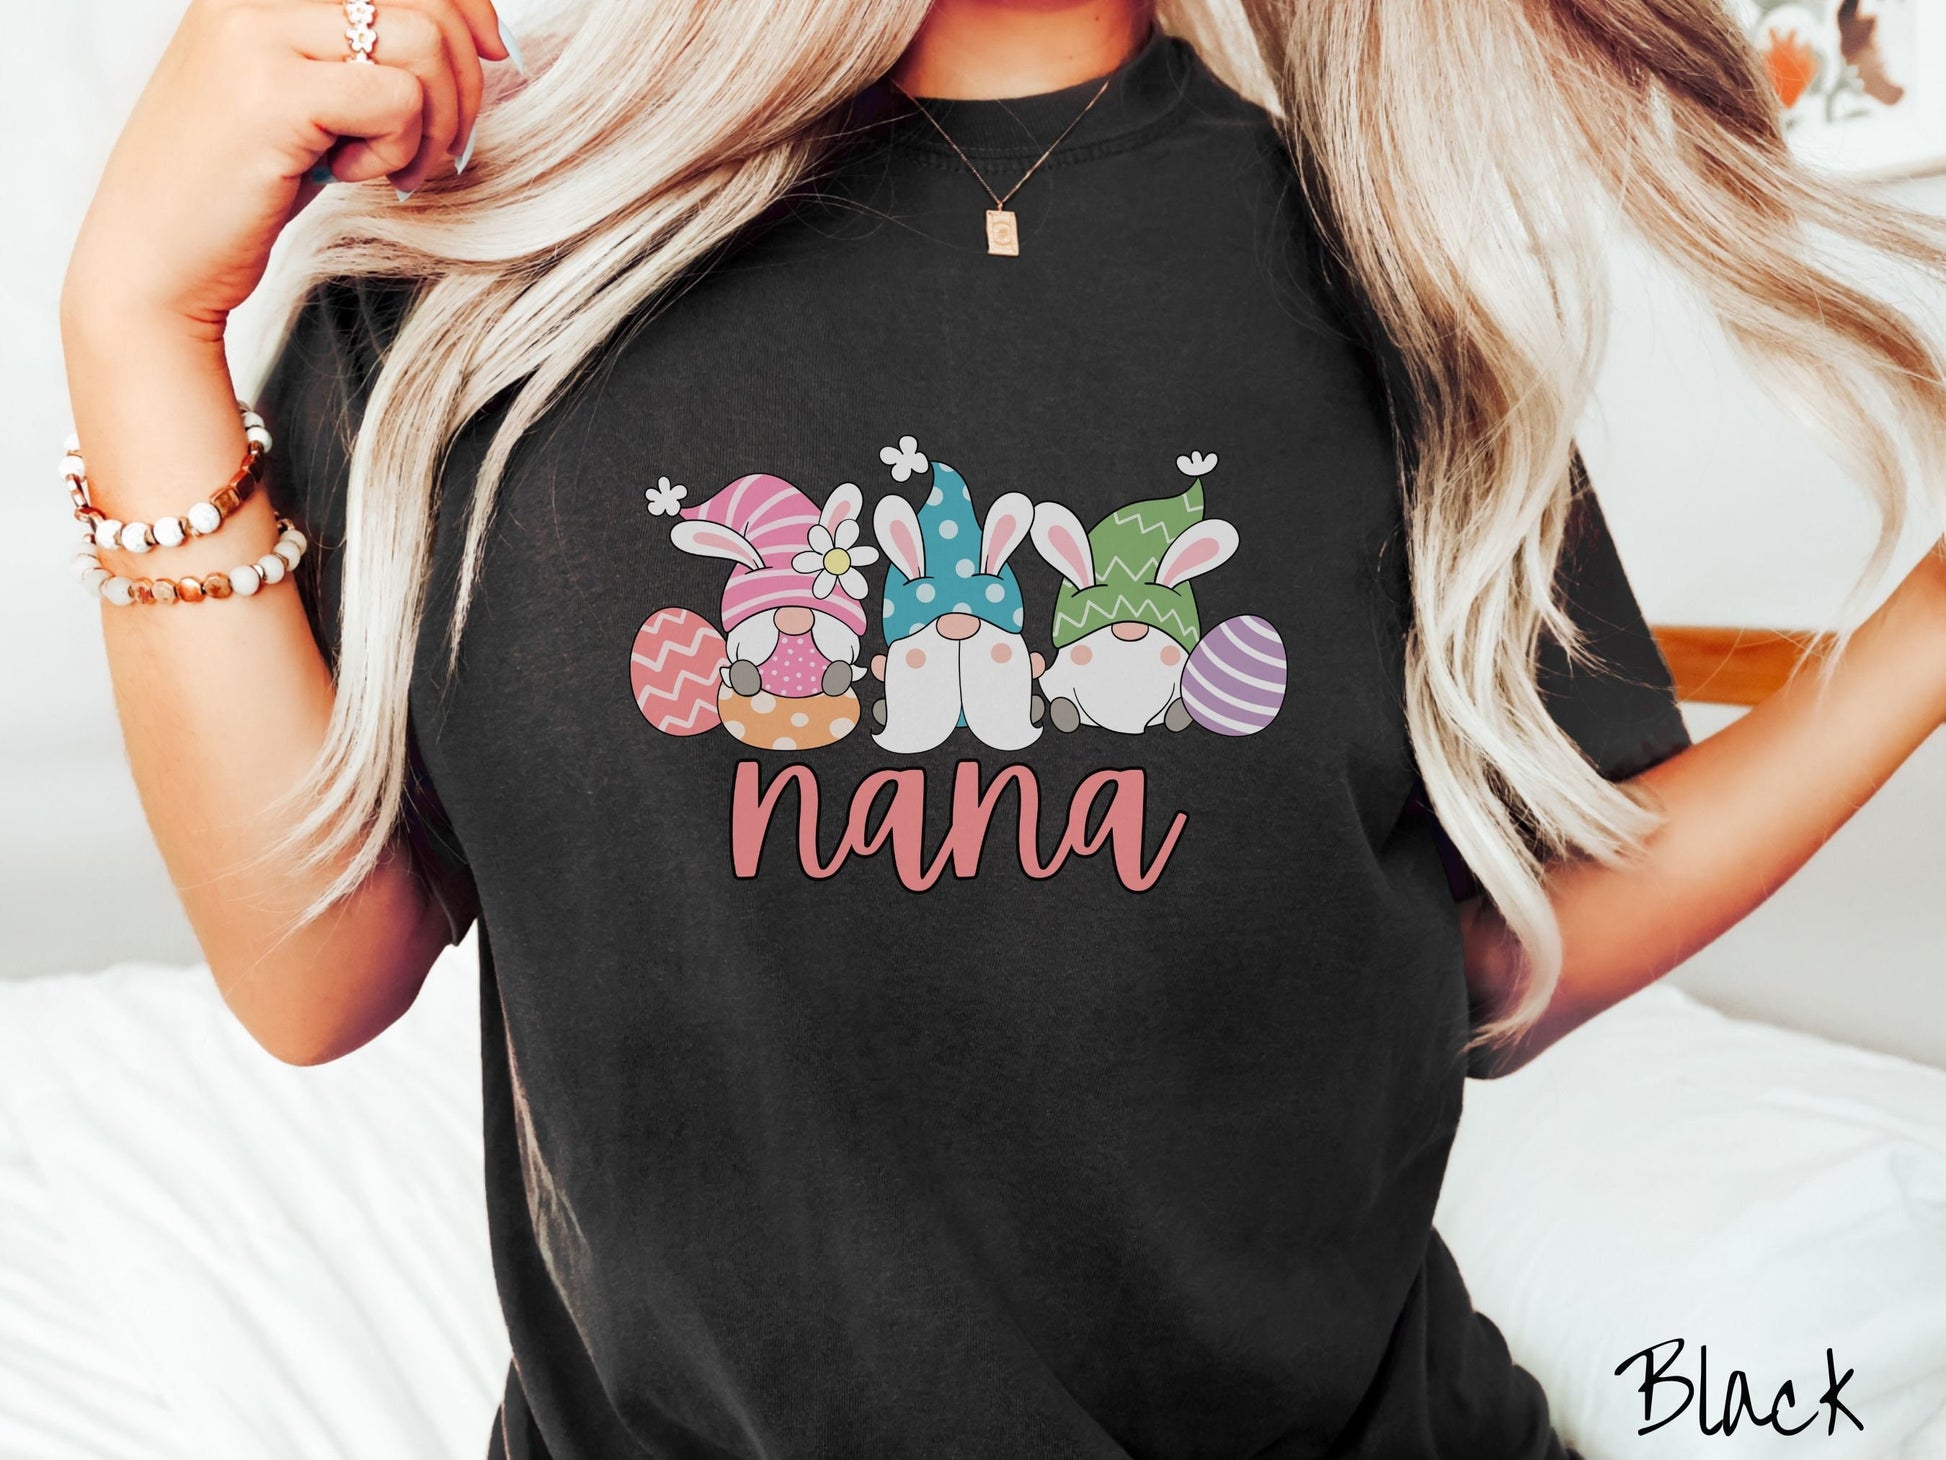 A woman wearing a cute, vintage black colored shirt with text Nana below three gnomes with rabbit ears sitting next to each other. The left one is wearing pink, the middle blue, and right in green, with colorful easter eggs scattered about.